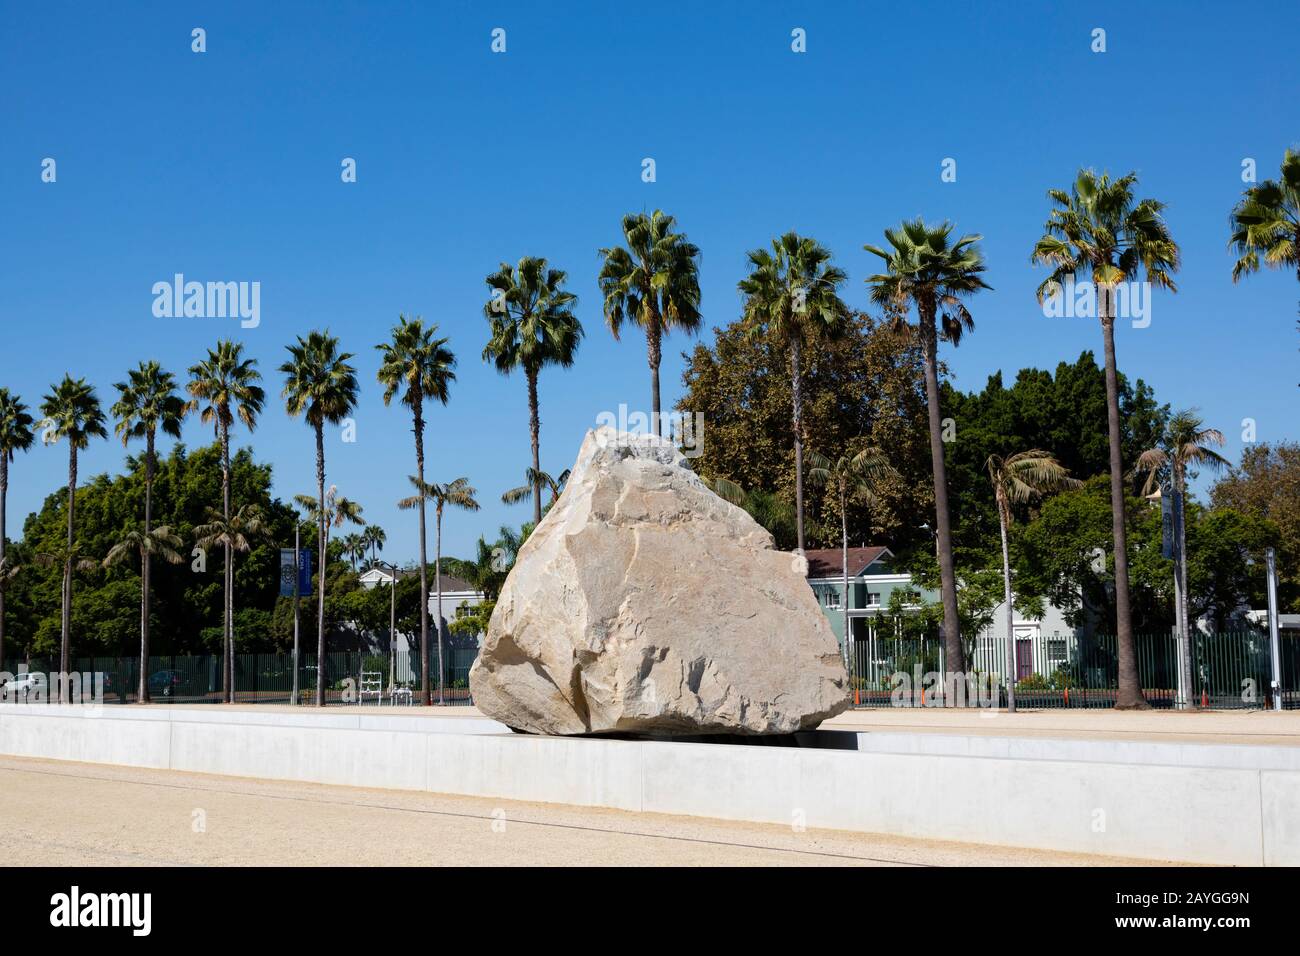 “Levitated Mass” public art sculpture by Michael Heizer, 2012. A 350 ton boulder situated  Resnick North Lawn at the Los Angeles County Museum of Art Stock Photo